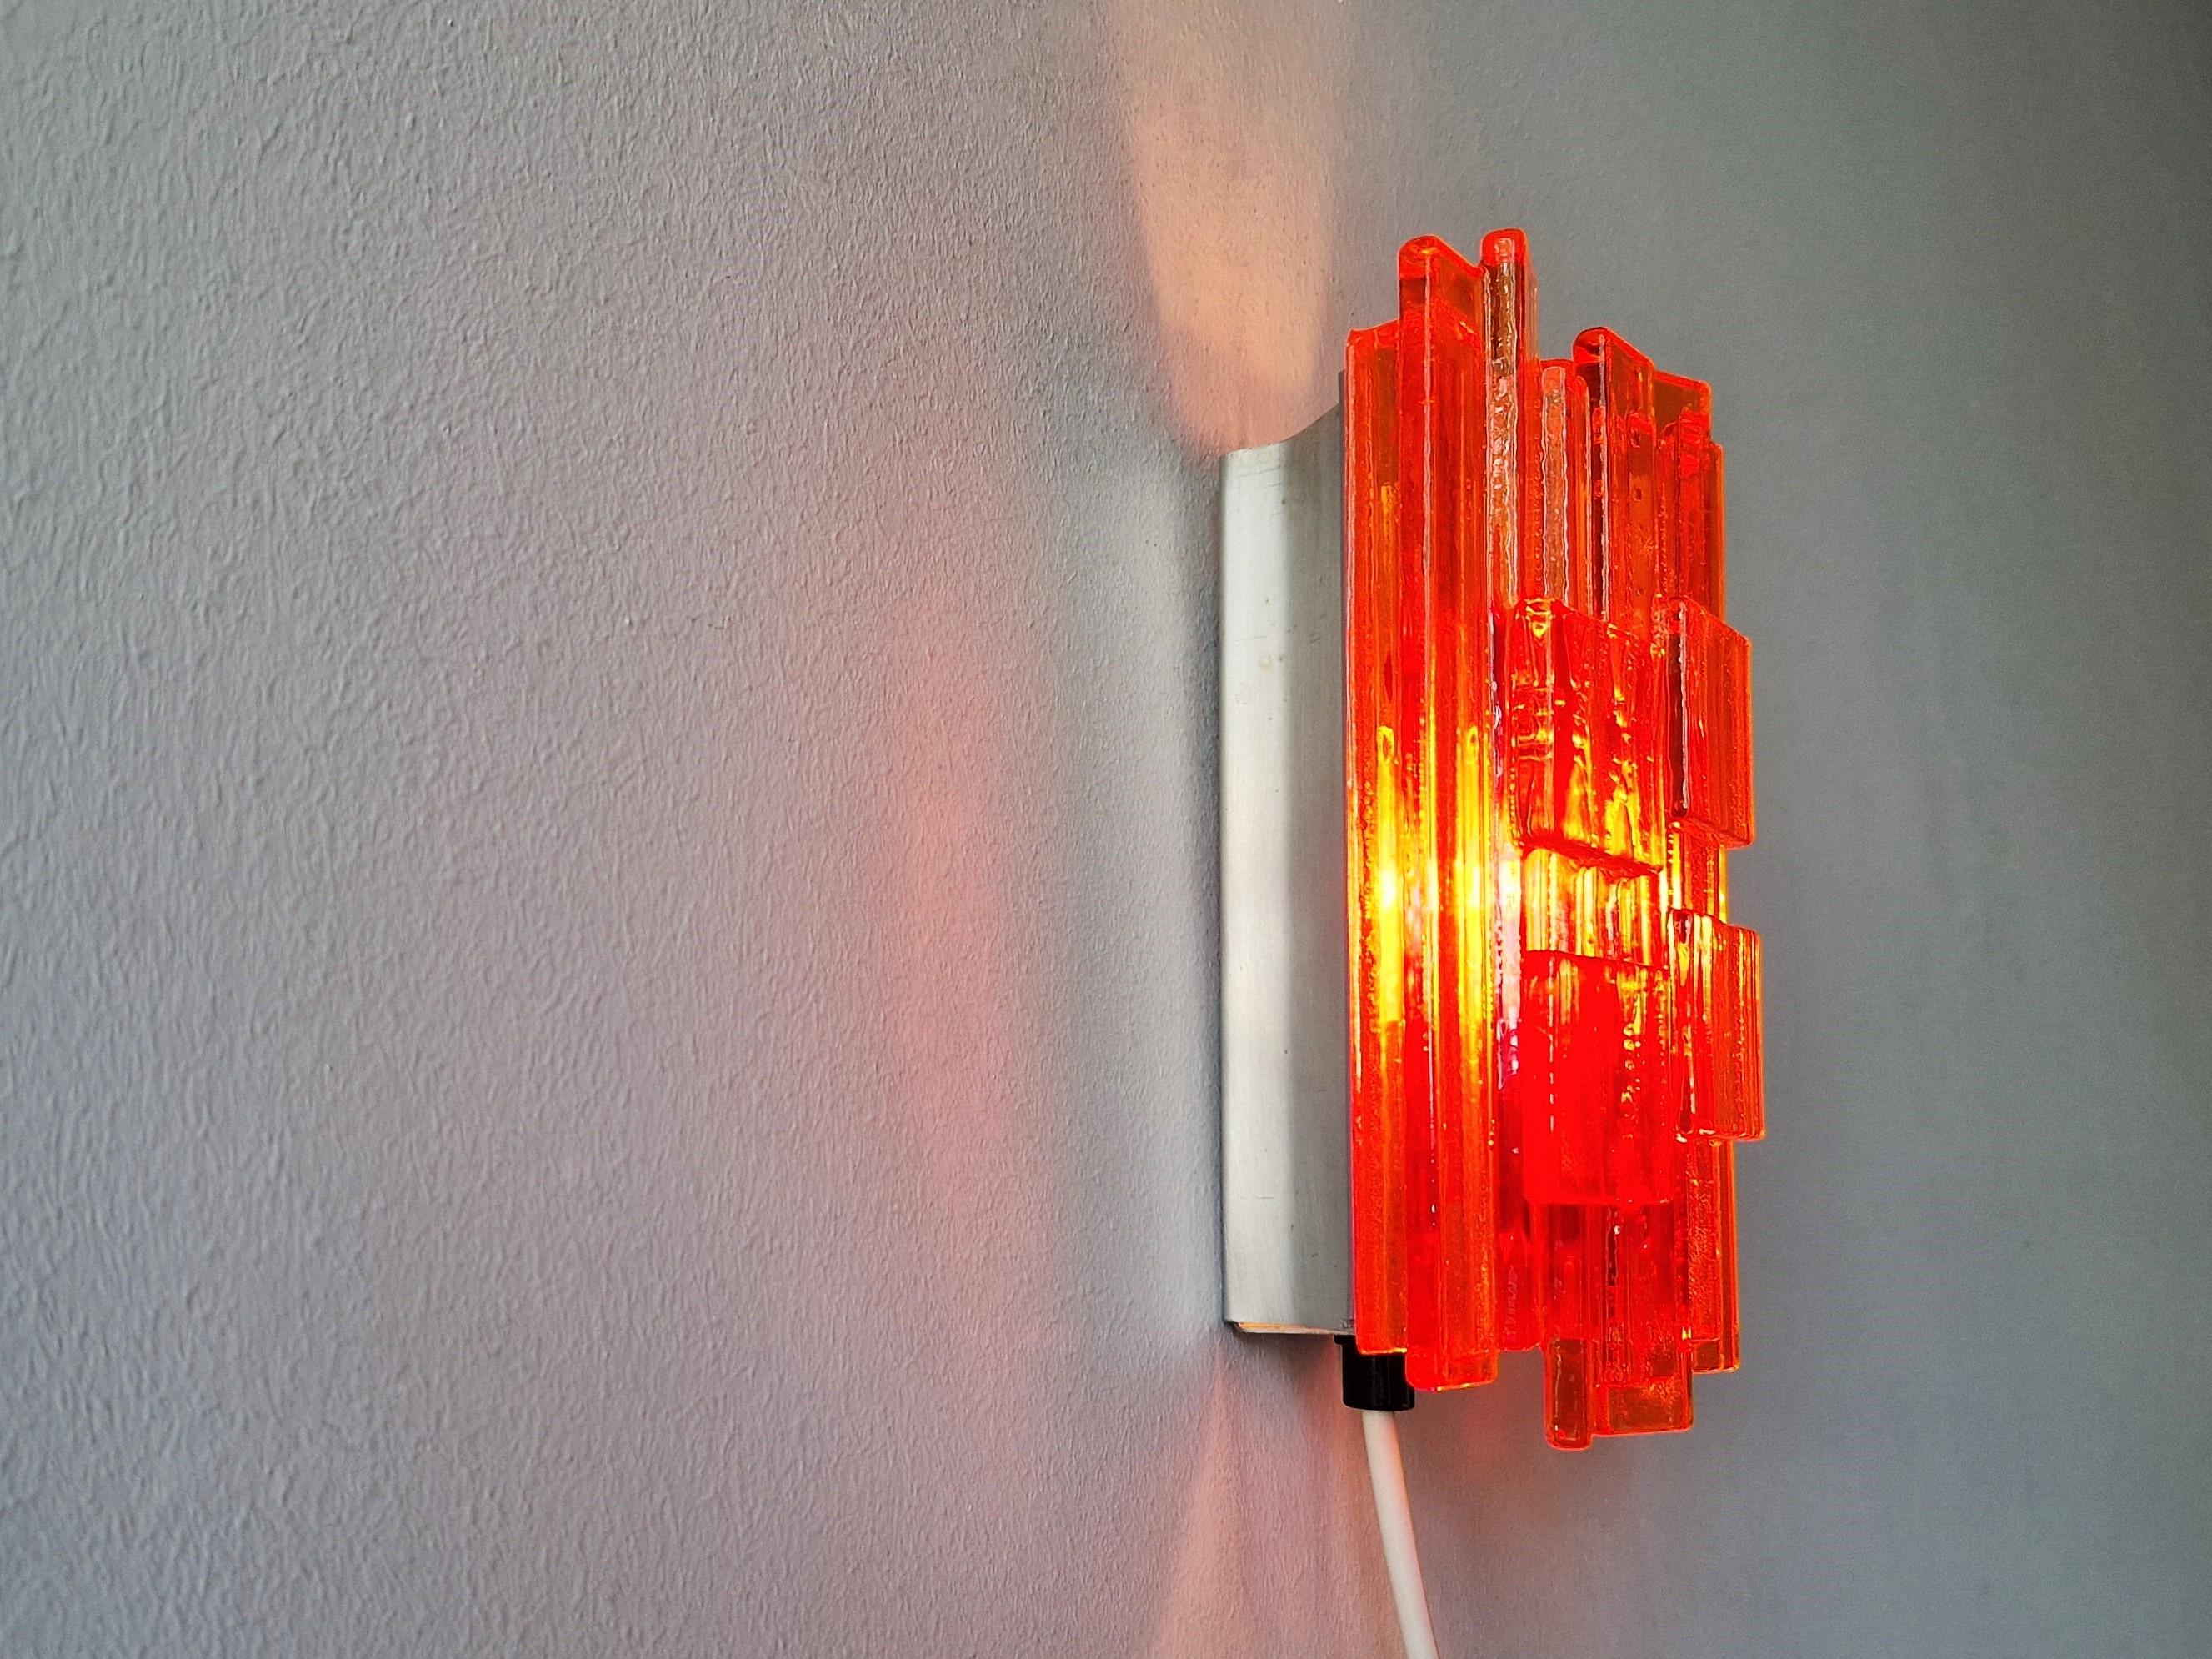 Mid-20th Century Orange Acrylic and Metal Wall Lamp by Claus Bolby for Cebo Industri, Denmark For Sale